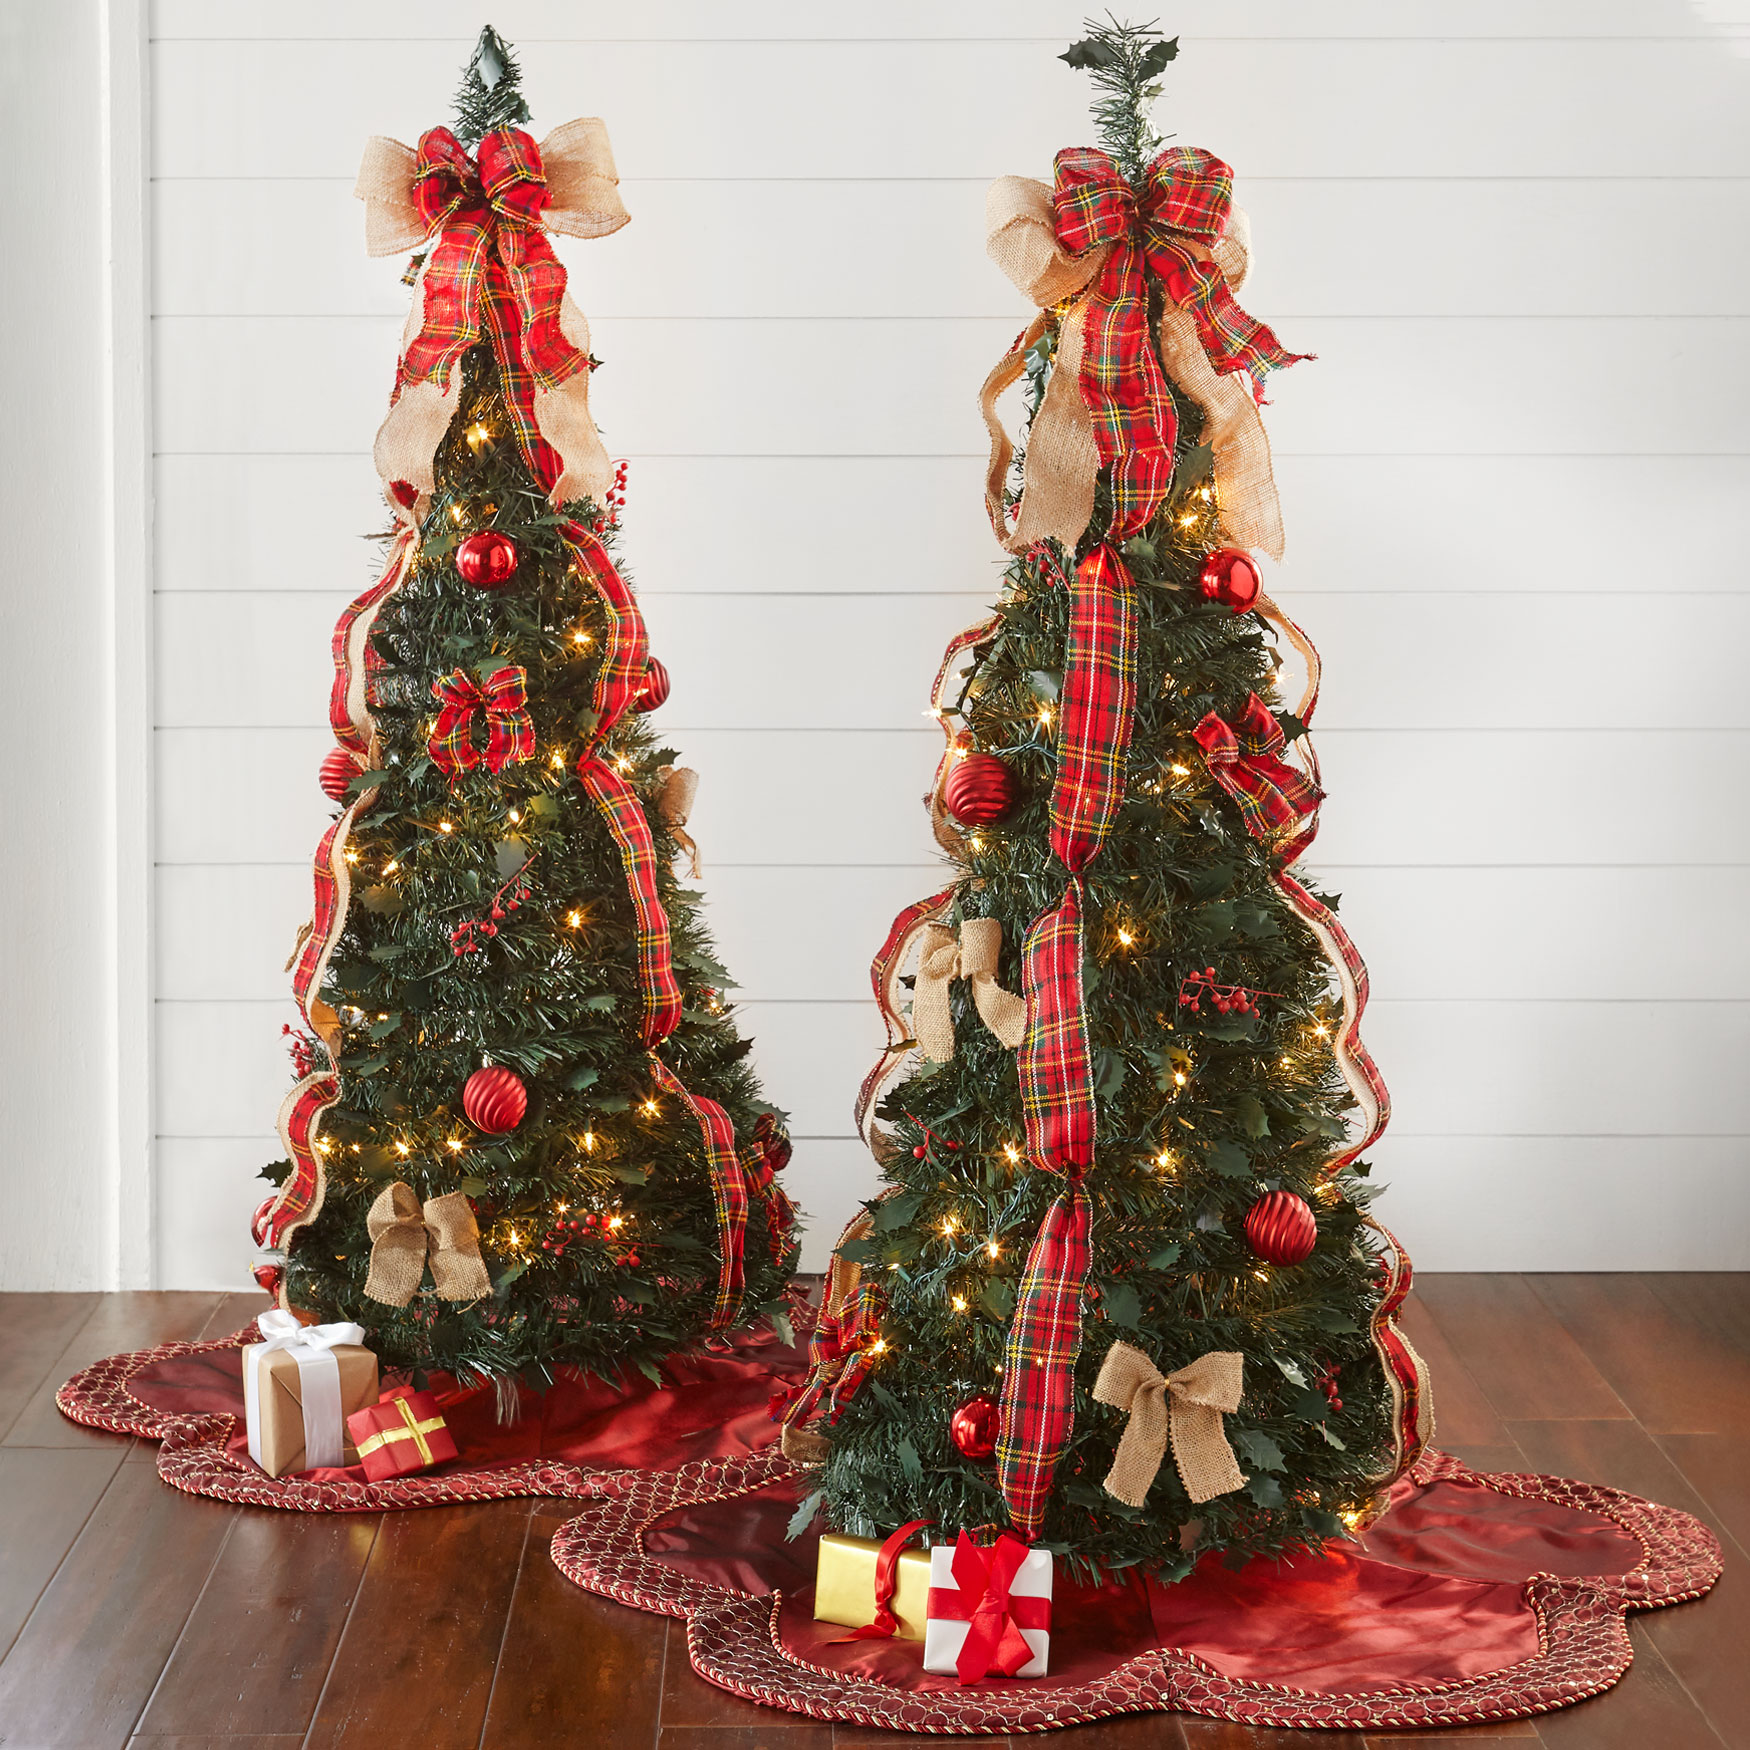 BrylaneHome Fully Decorated Pre-Lit 4 1//2 Pop-Up Christmas Tree Plaid